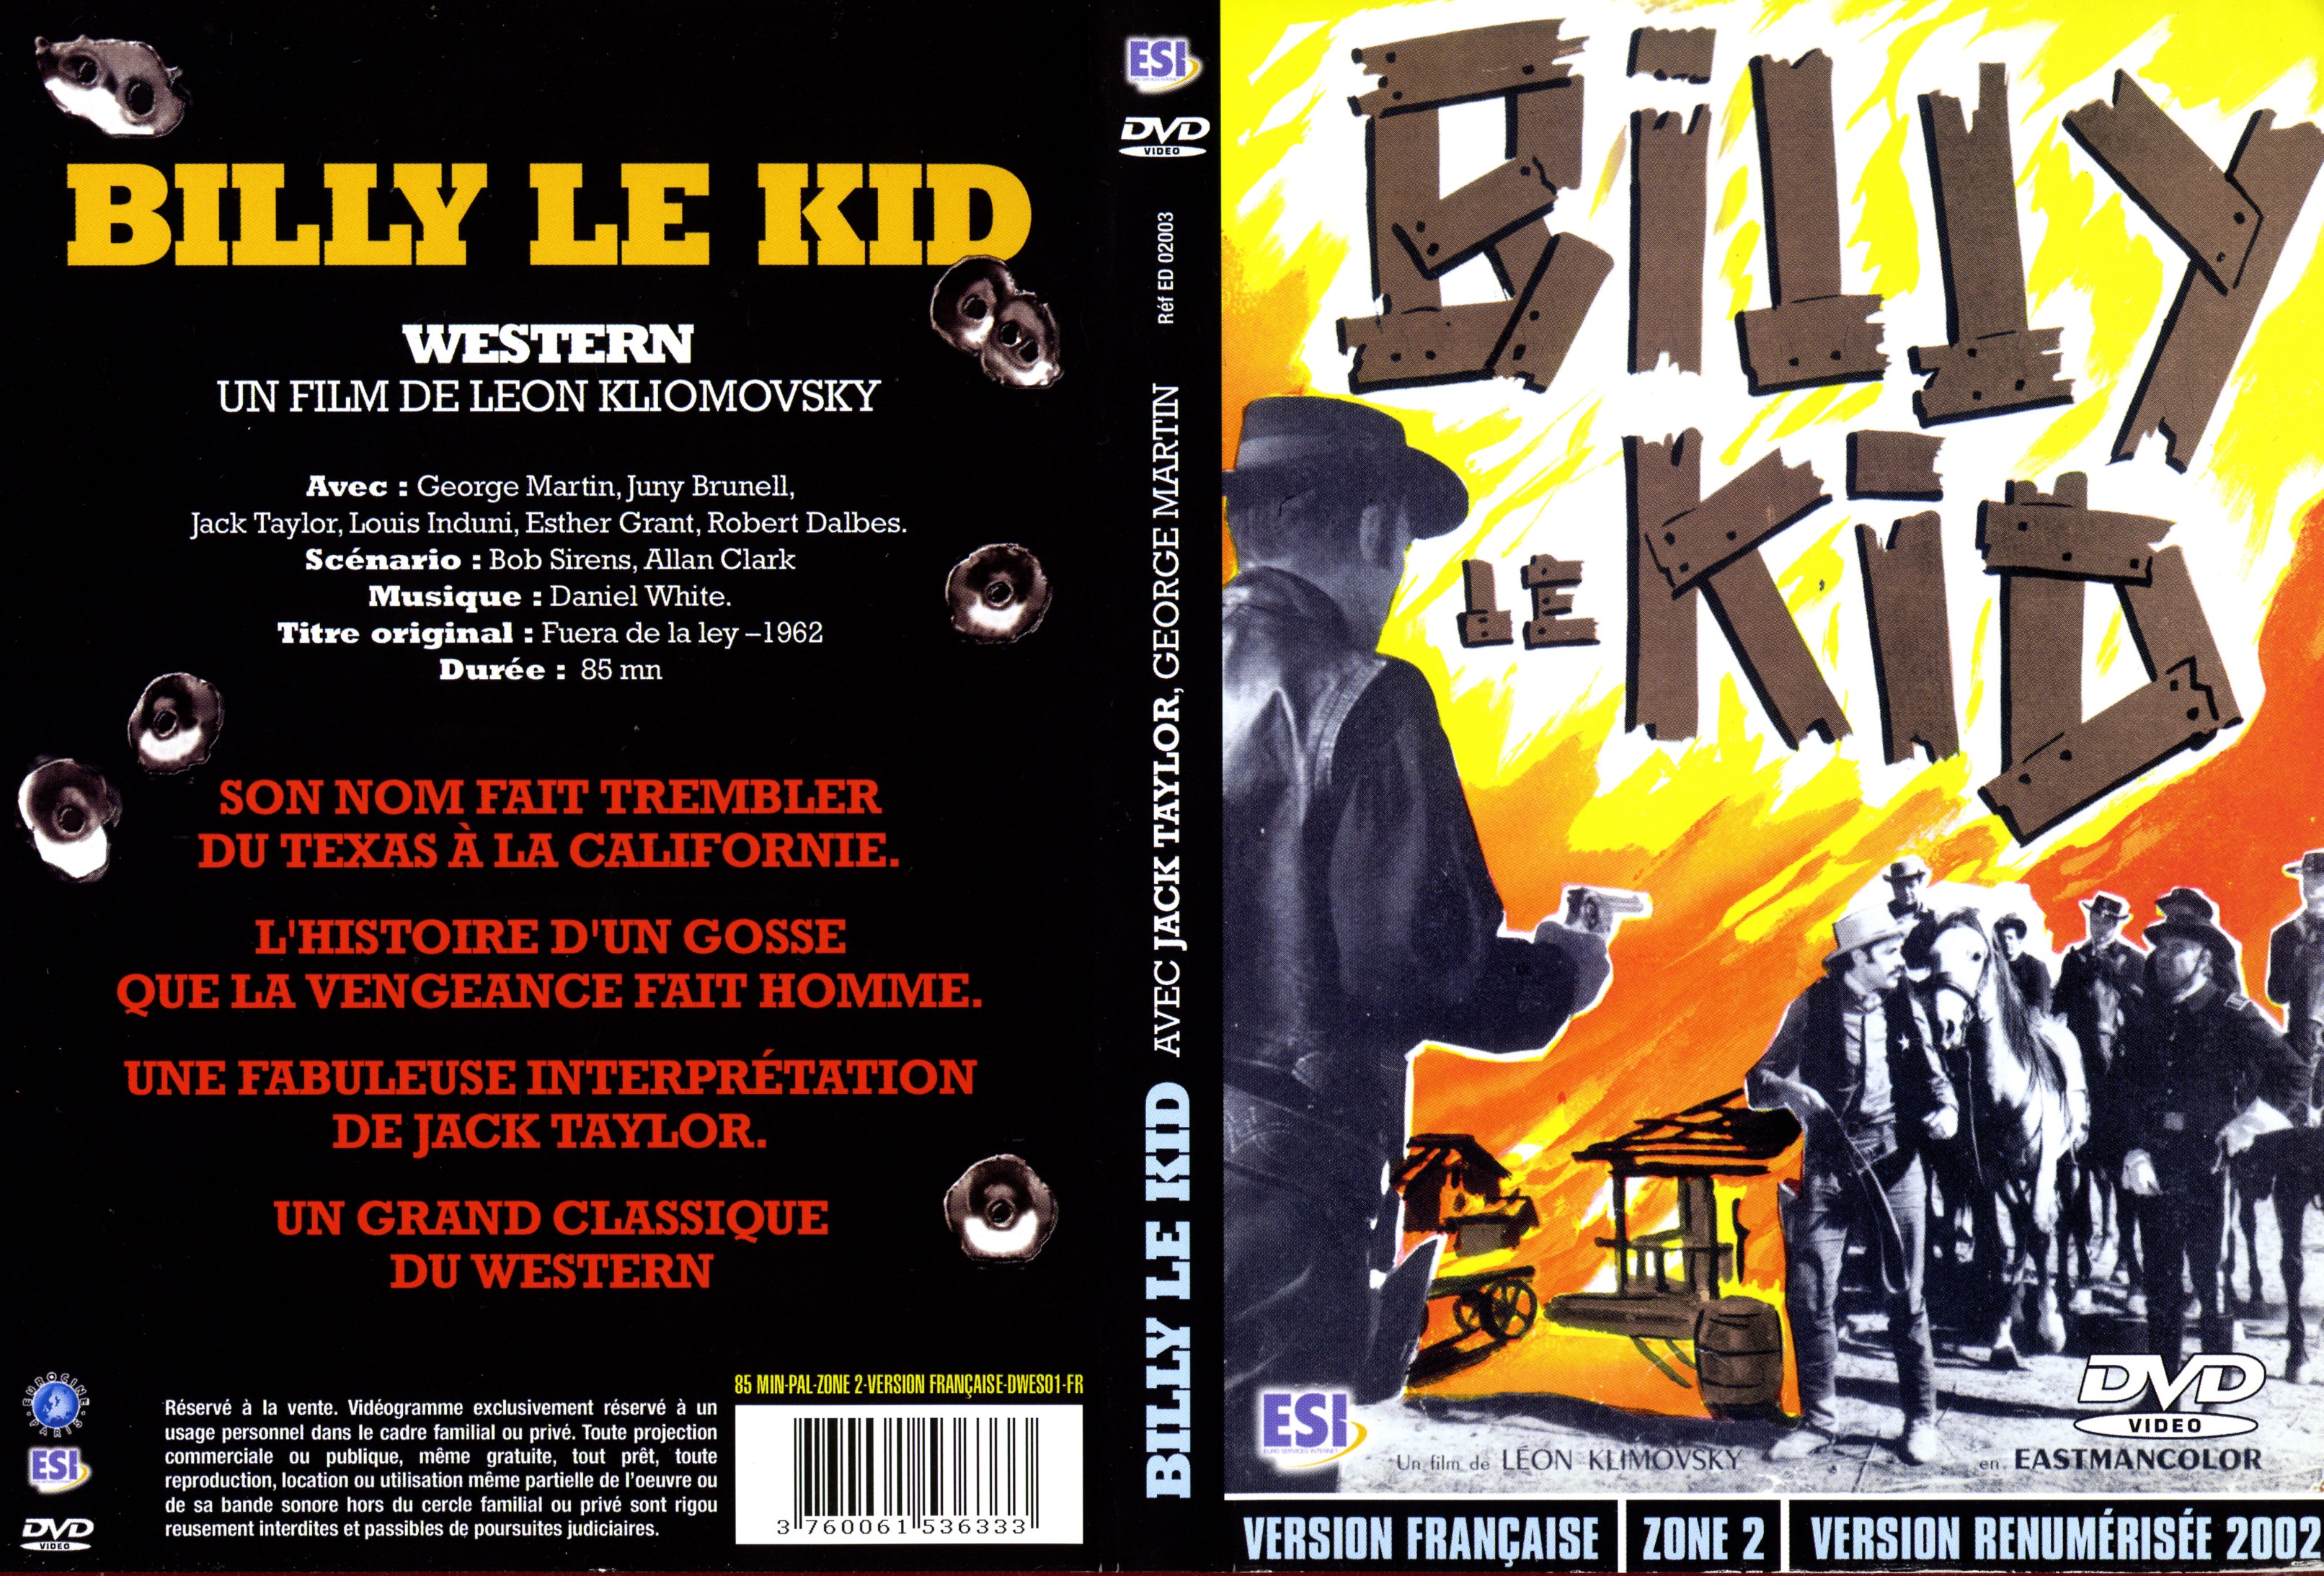 Jaquette DVD Billy le kid